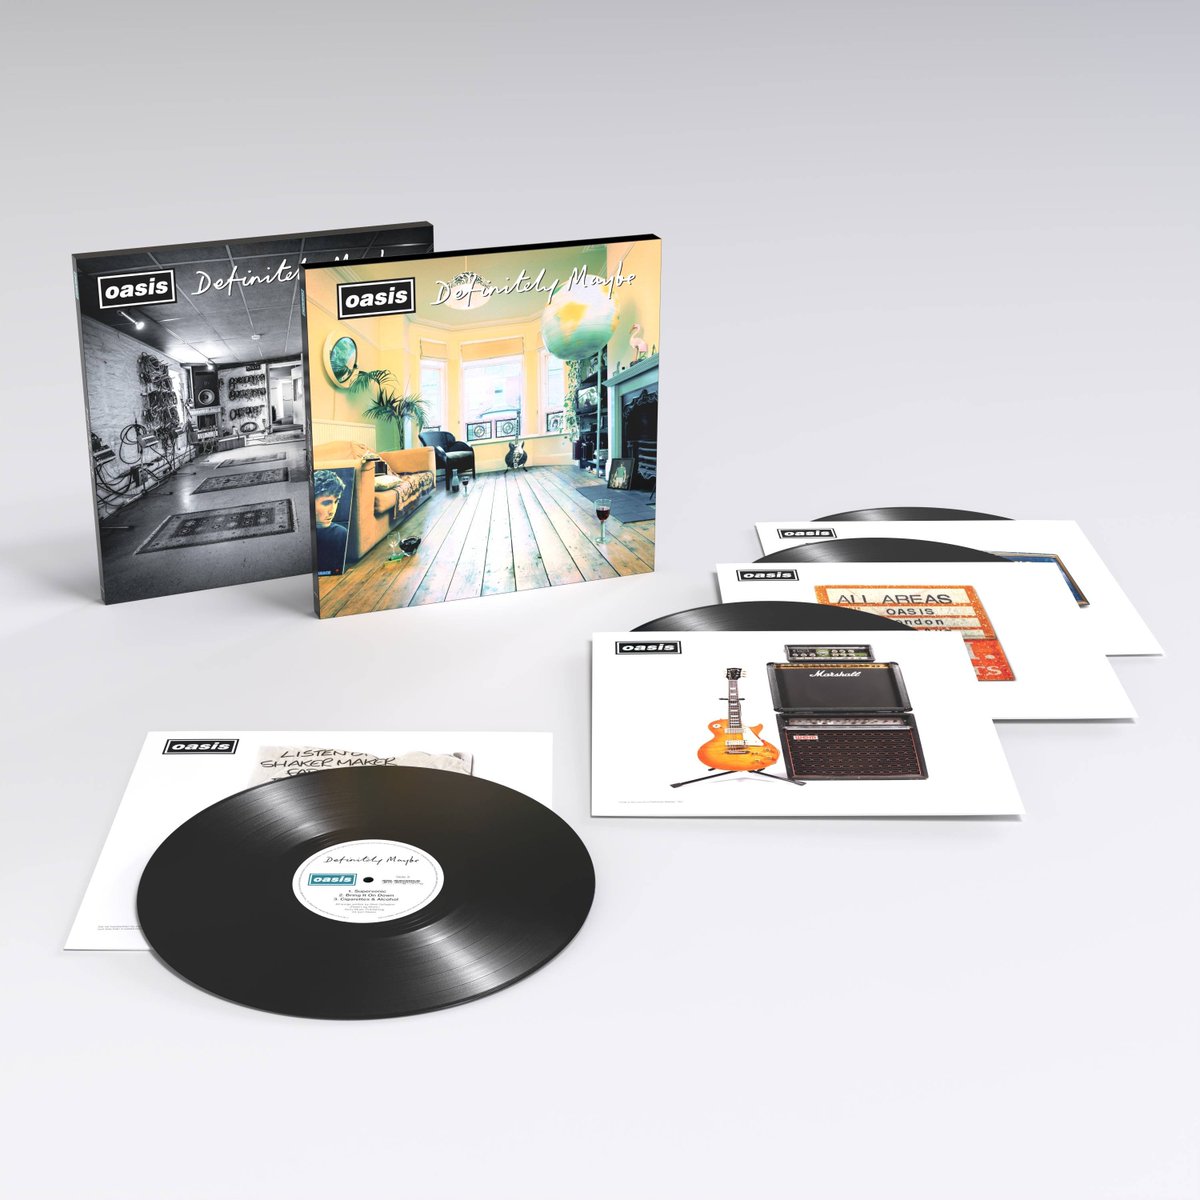 This year marks 30 years of @oasis' seminal album 'Defintely Maybe'. Now celebrated by a 30th anniversary format, including a Limited Edition deluxe 4LP and 2CD featuring unreleased recordings, demos and retail exclusive 'strawberries and cream' vinyl. roughtrade.com/en-gb/product/…